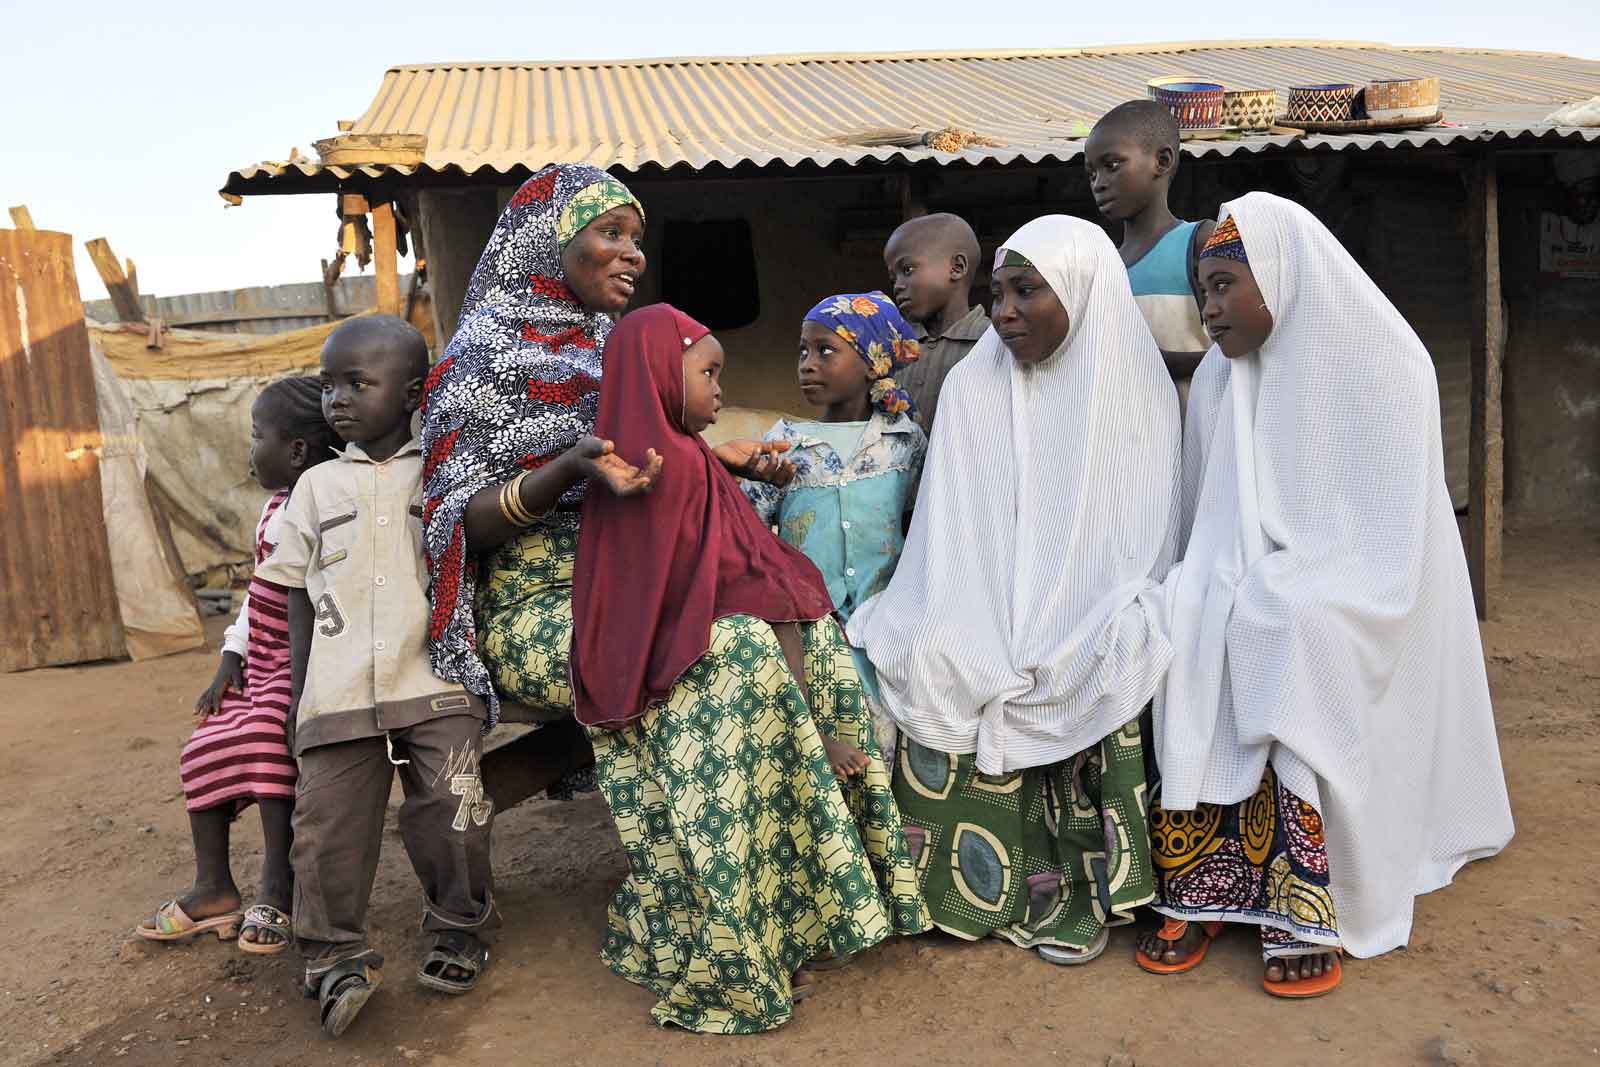  Maryam Salihu Maaji (left), a community influencer who lives in Damangaza Angwahausa, on the outskirts of Abuja, helps to co-ordinate efforts to increase vaccine coverage. Here she chats with local mothers about immunisation and health issues.